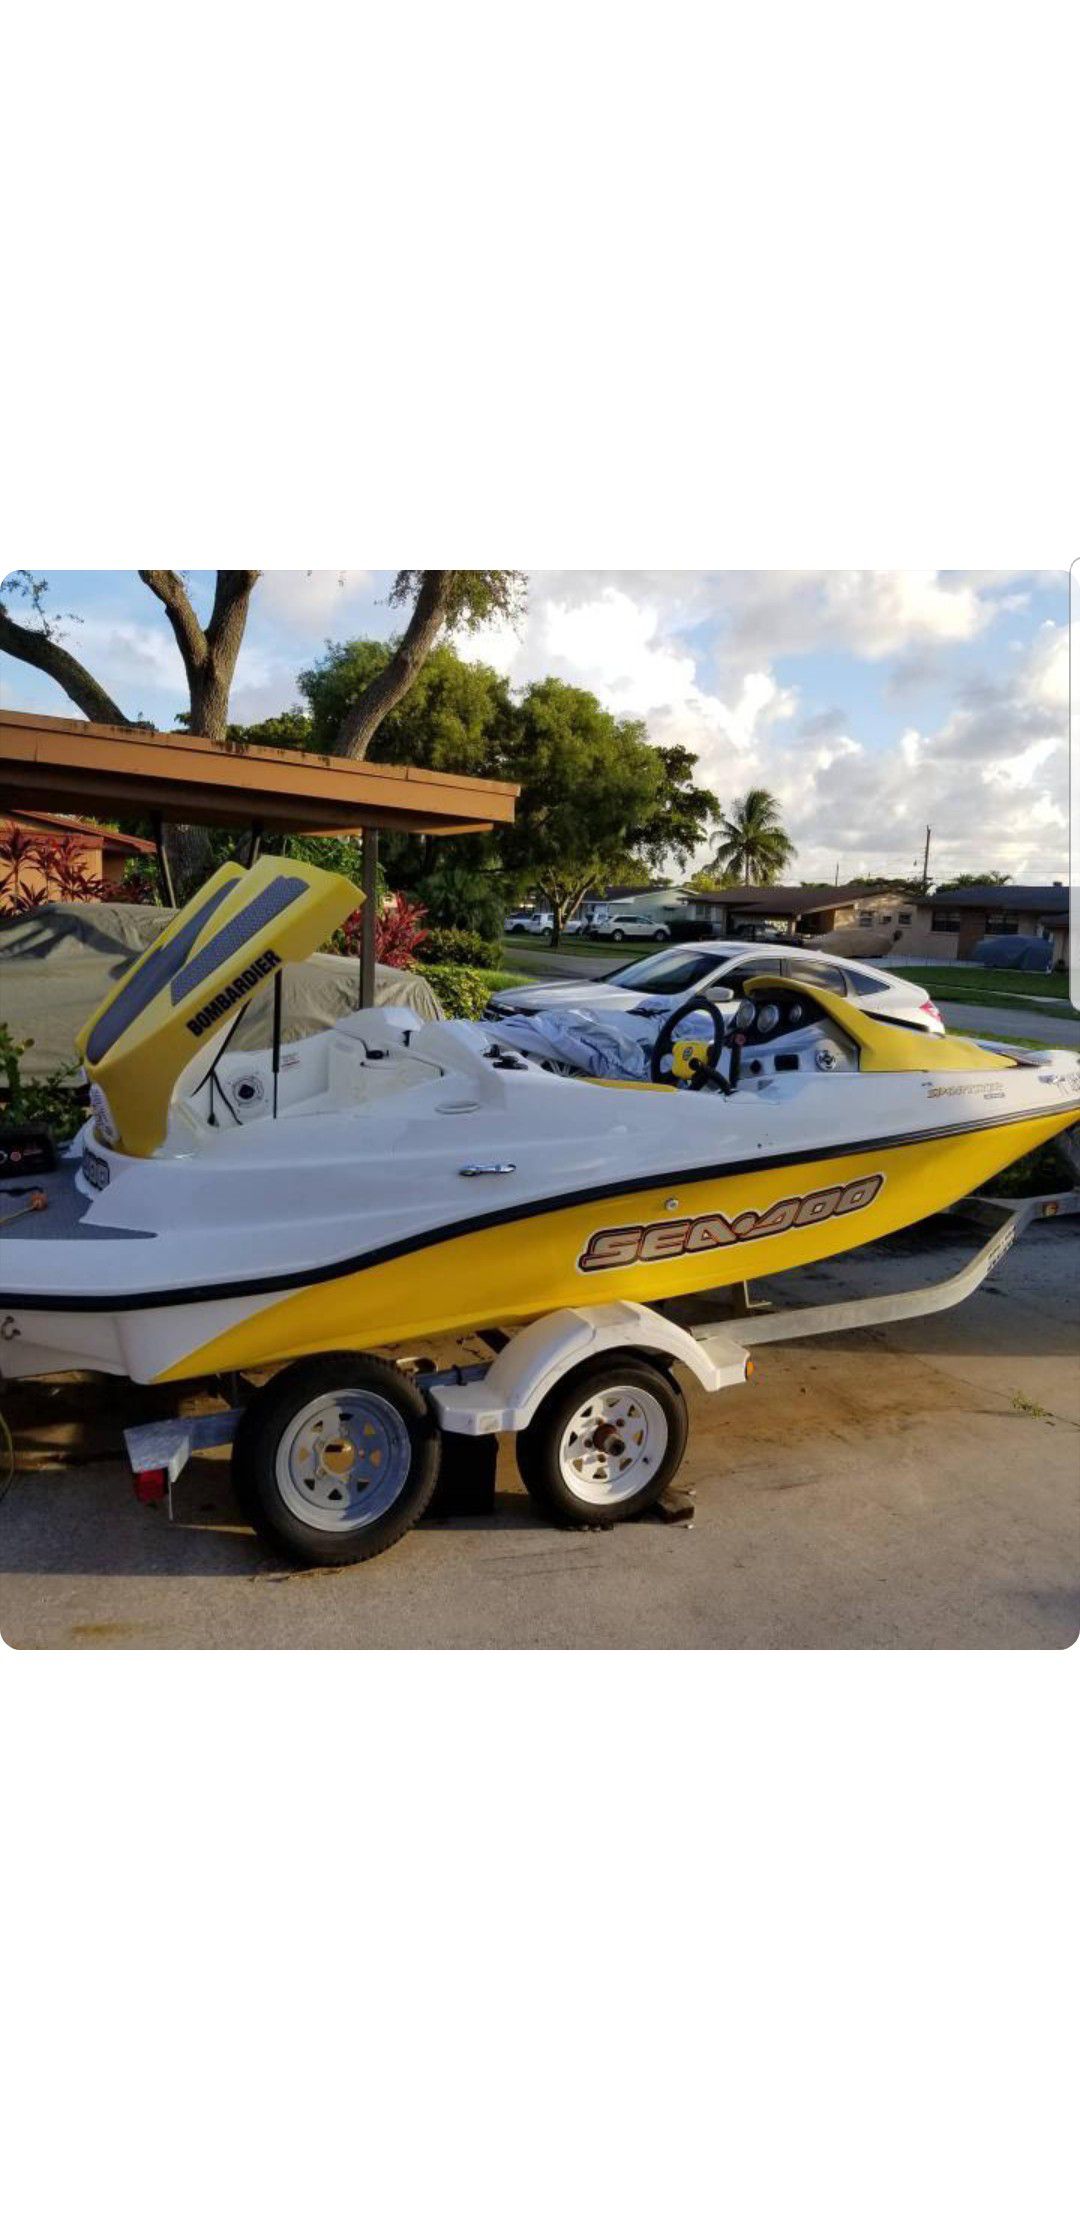 2004 Seadoo Sportster jet boat asking $6,500 or best offer ready for the water